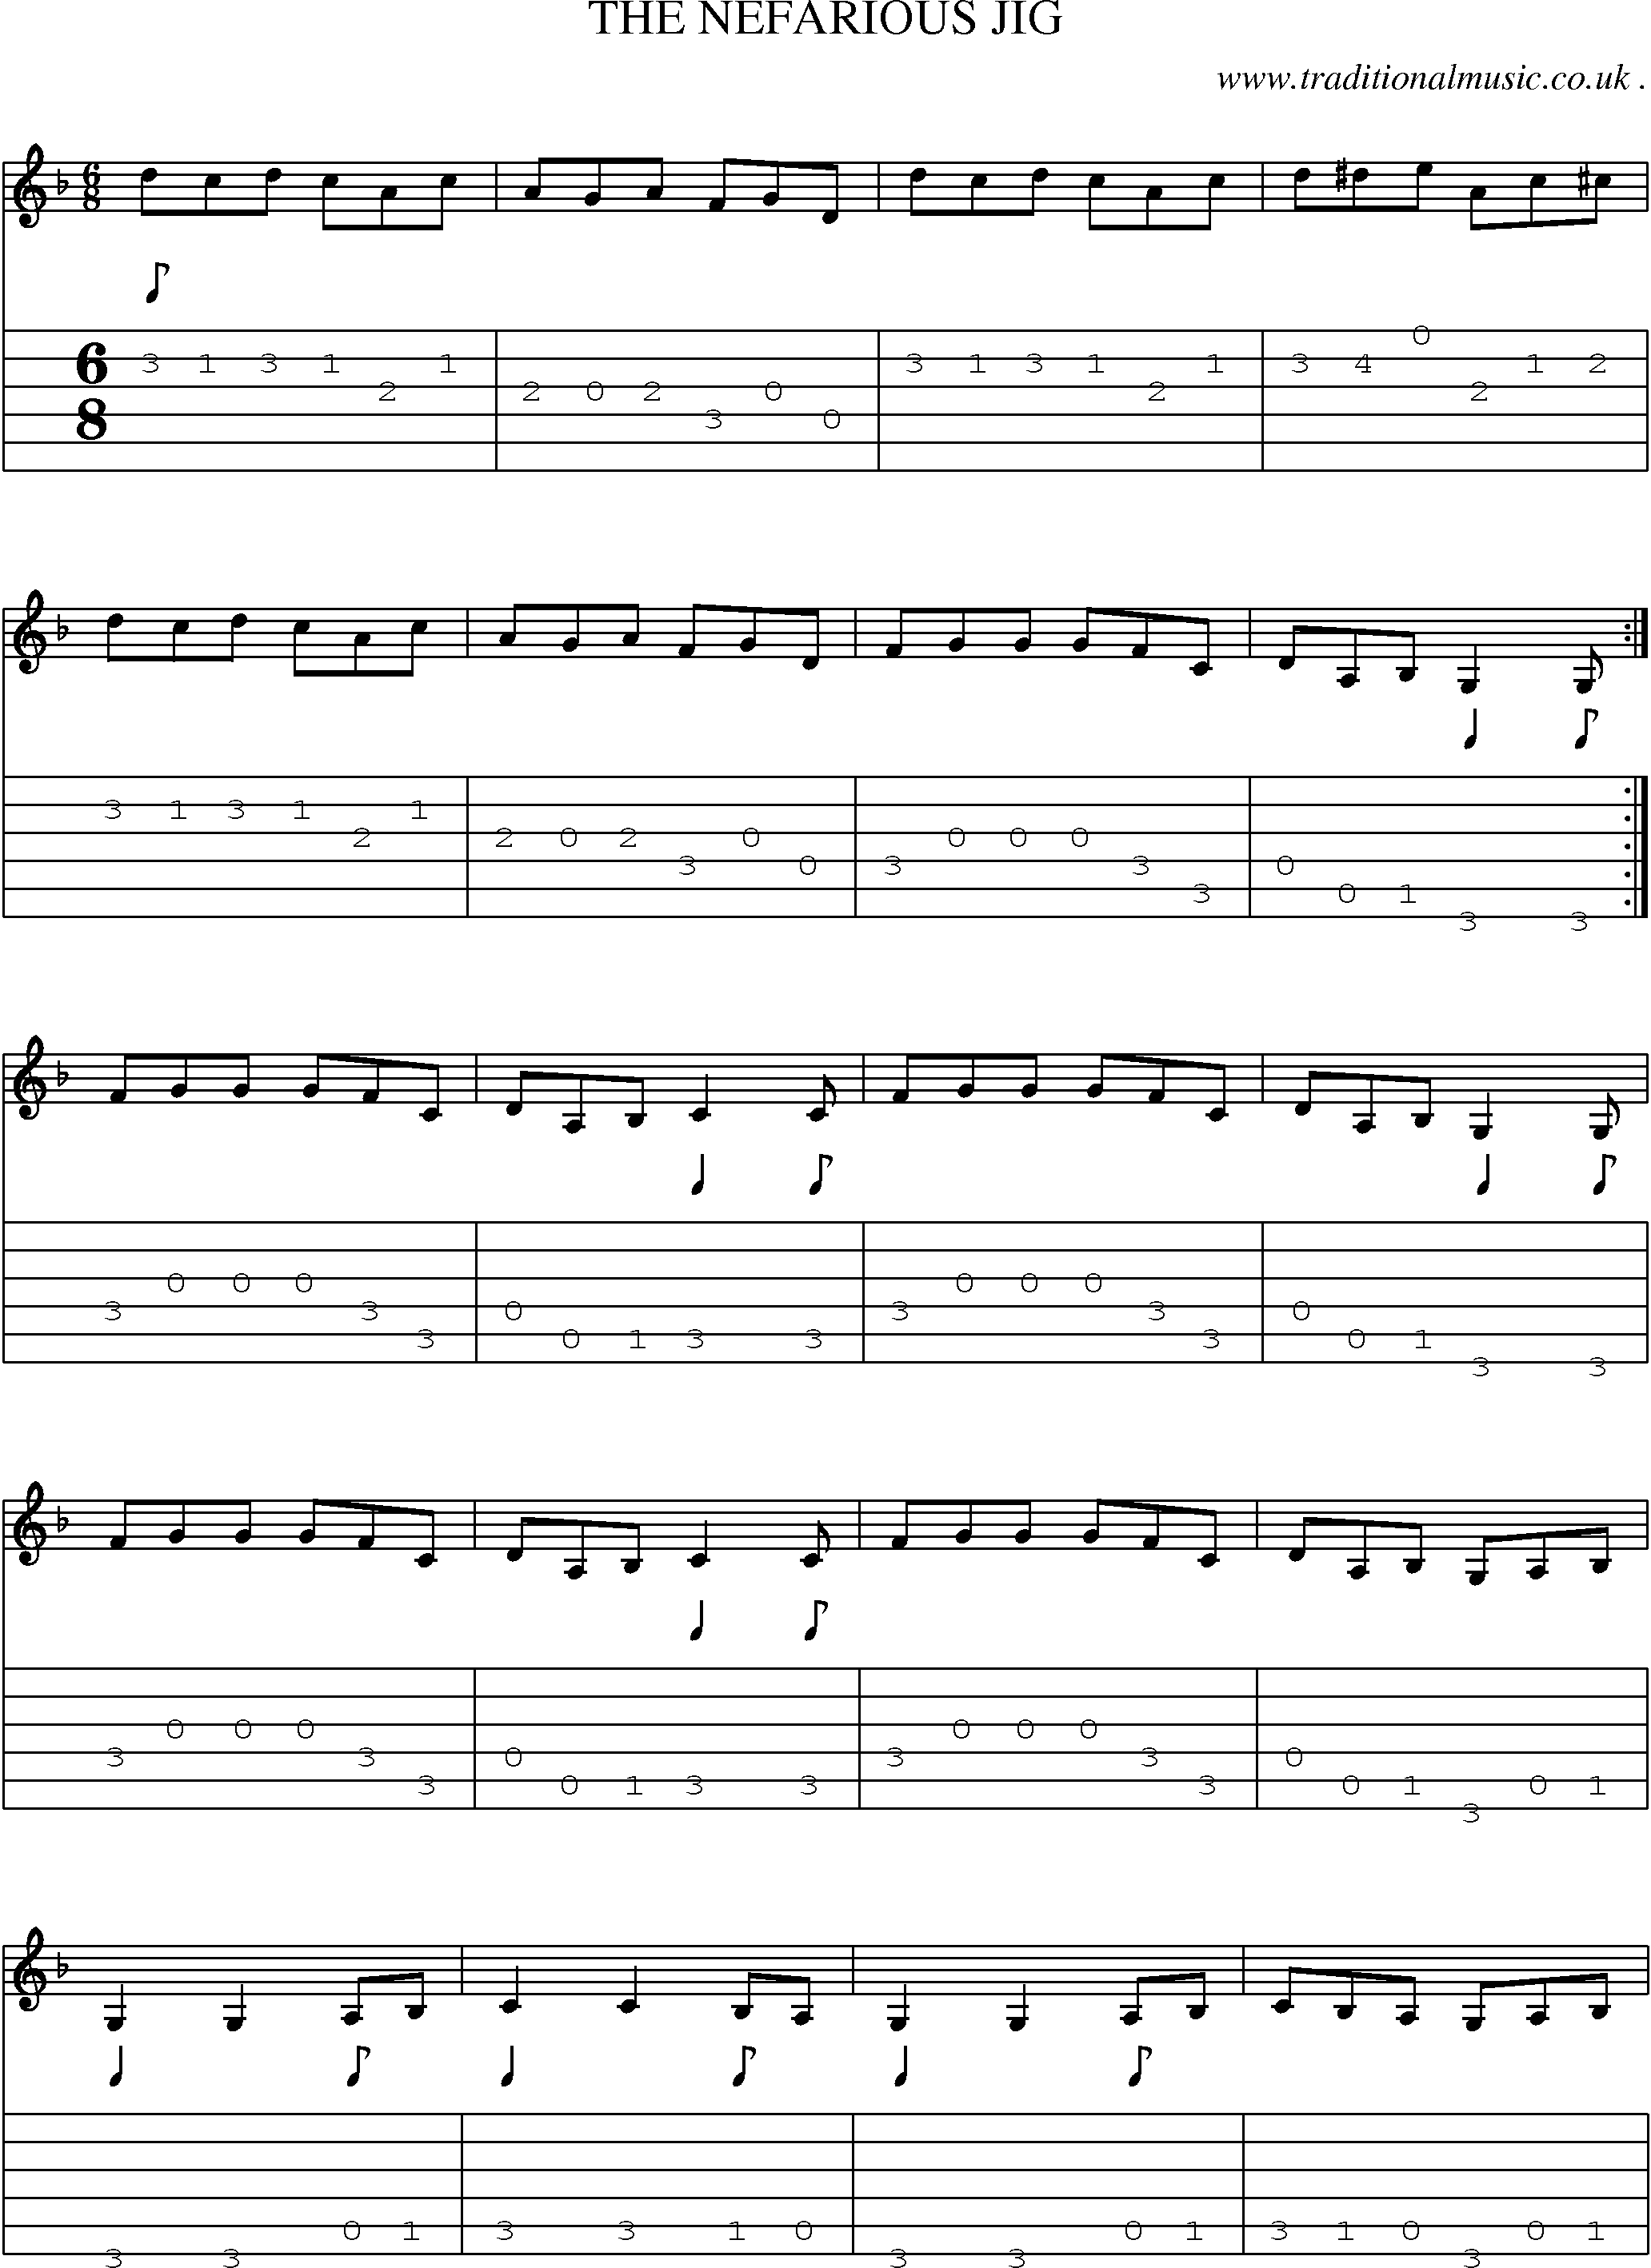 Sheet-Music and Guitar Tabs for The Nefarious Jig